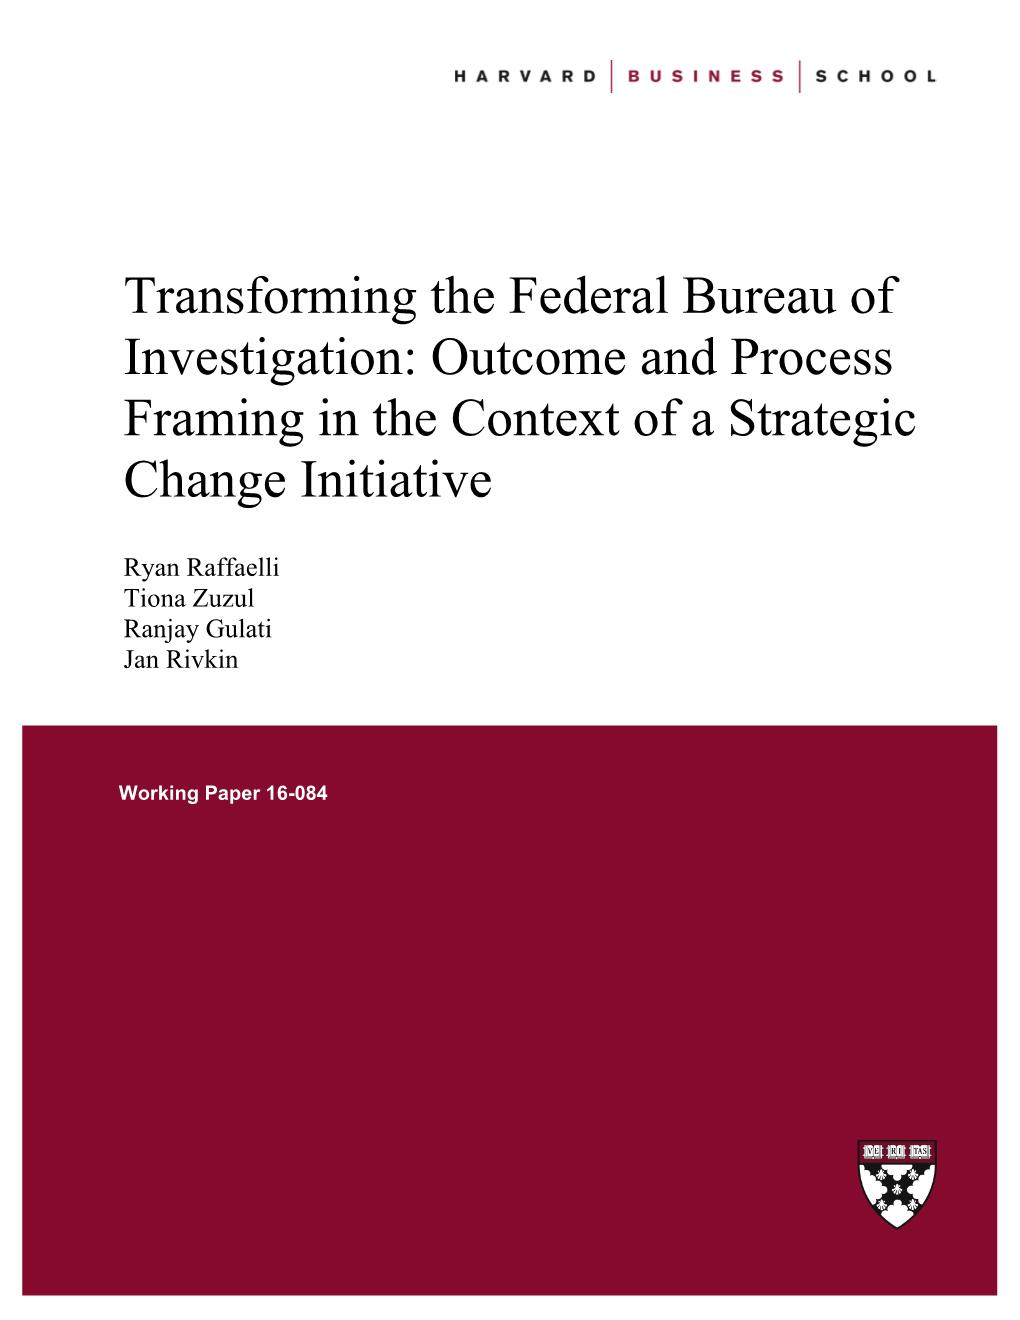 Transforming the Federal Bureau of Investigation: Outcome and Process Framing in the Context of a Strategic Change Initiative